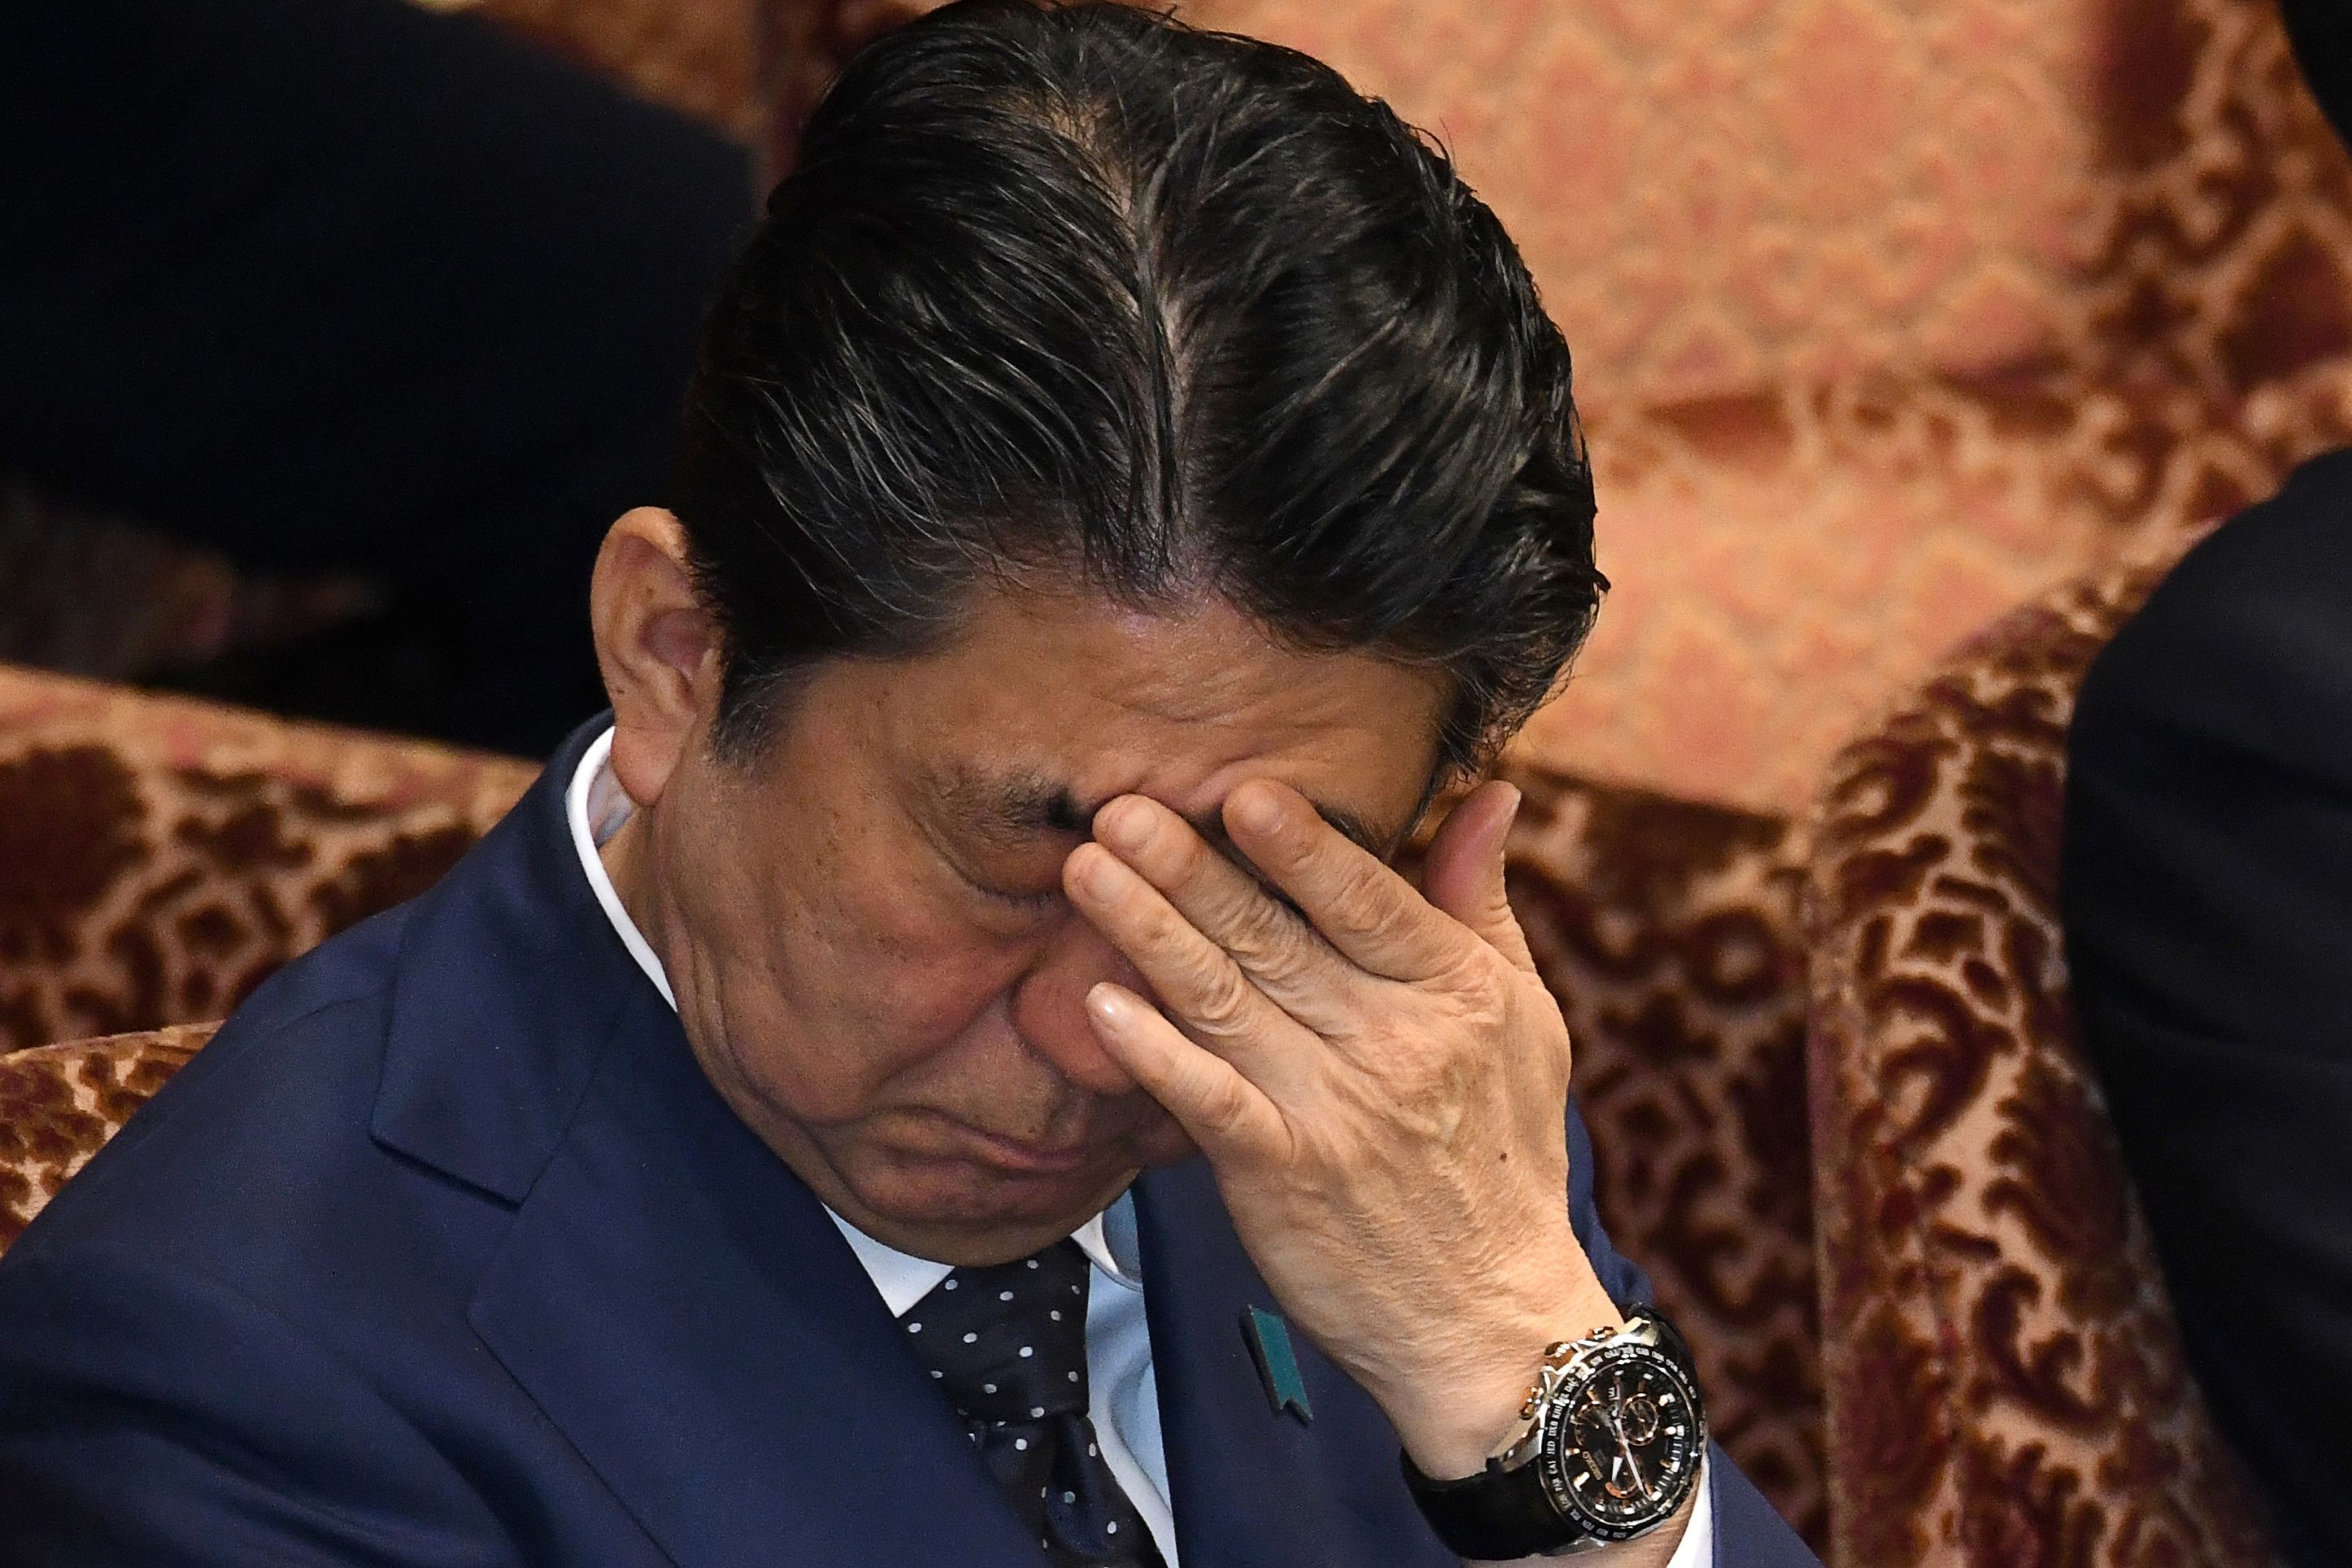 A cronyism row surrounding the Japanese PM threatens the chief cheerleader of the re-named pact. And even if Shinzo Abe scrapes by, Malaysian voters could throw a spanner in the works